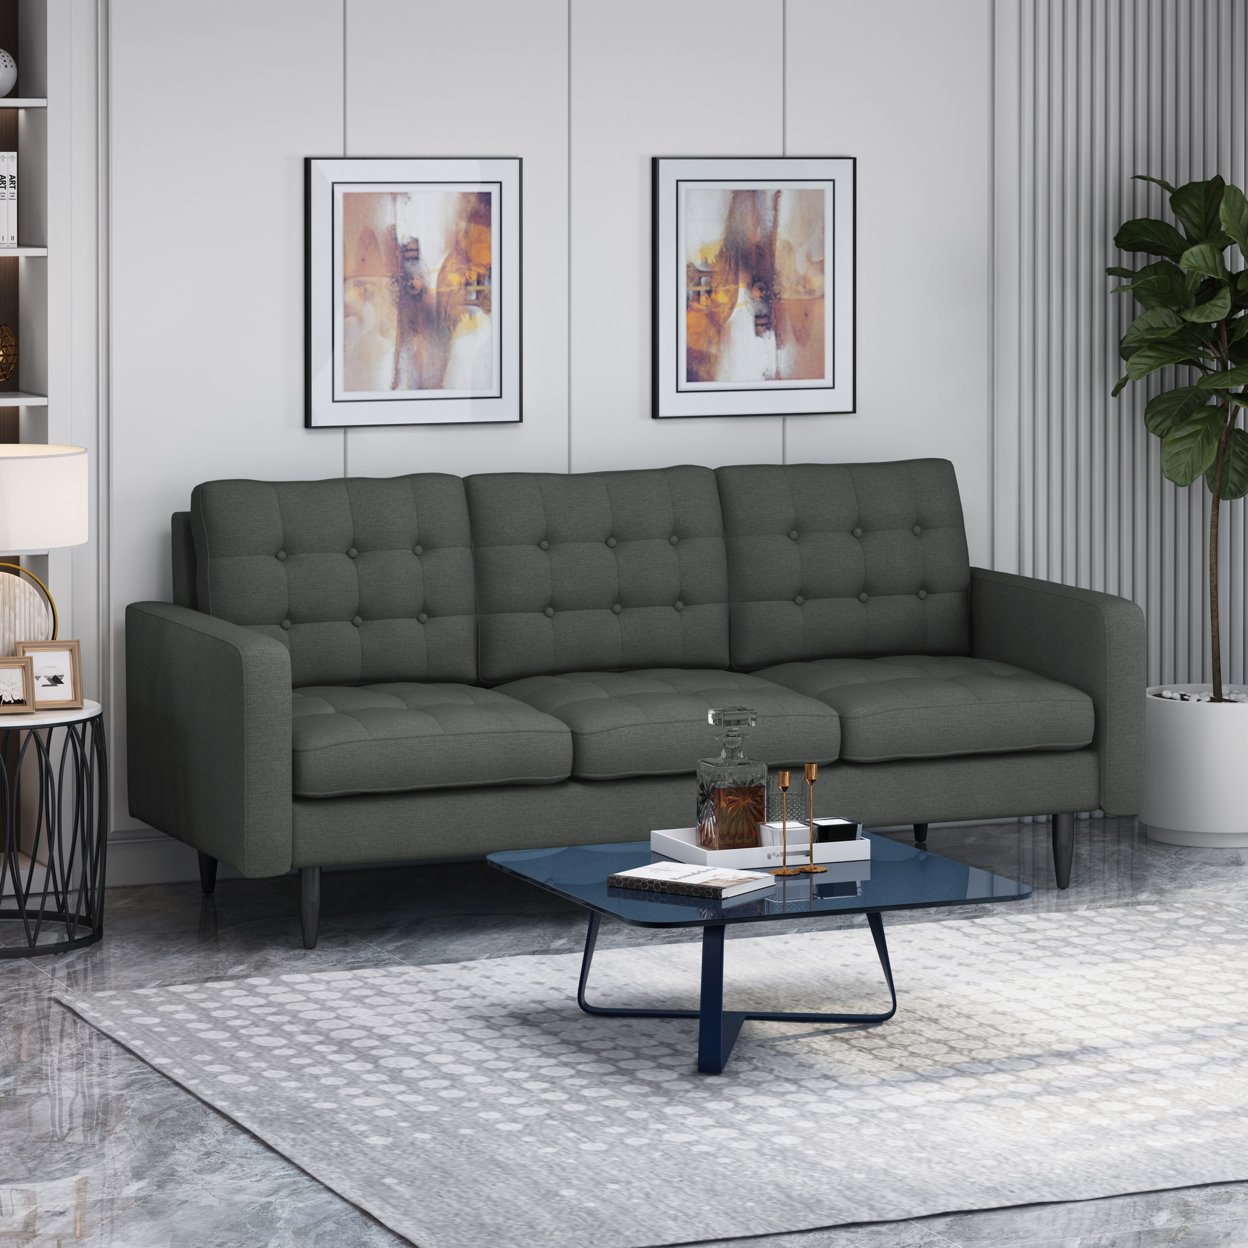 Jenny Contemporary Tufted Fabric 3 Seater Sofa - Blue + Dark Brown